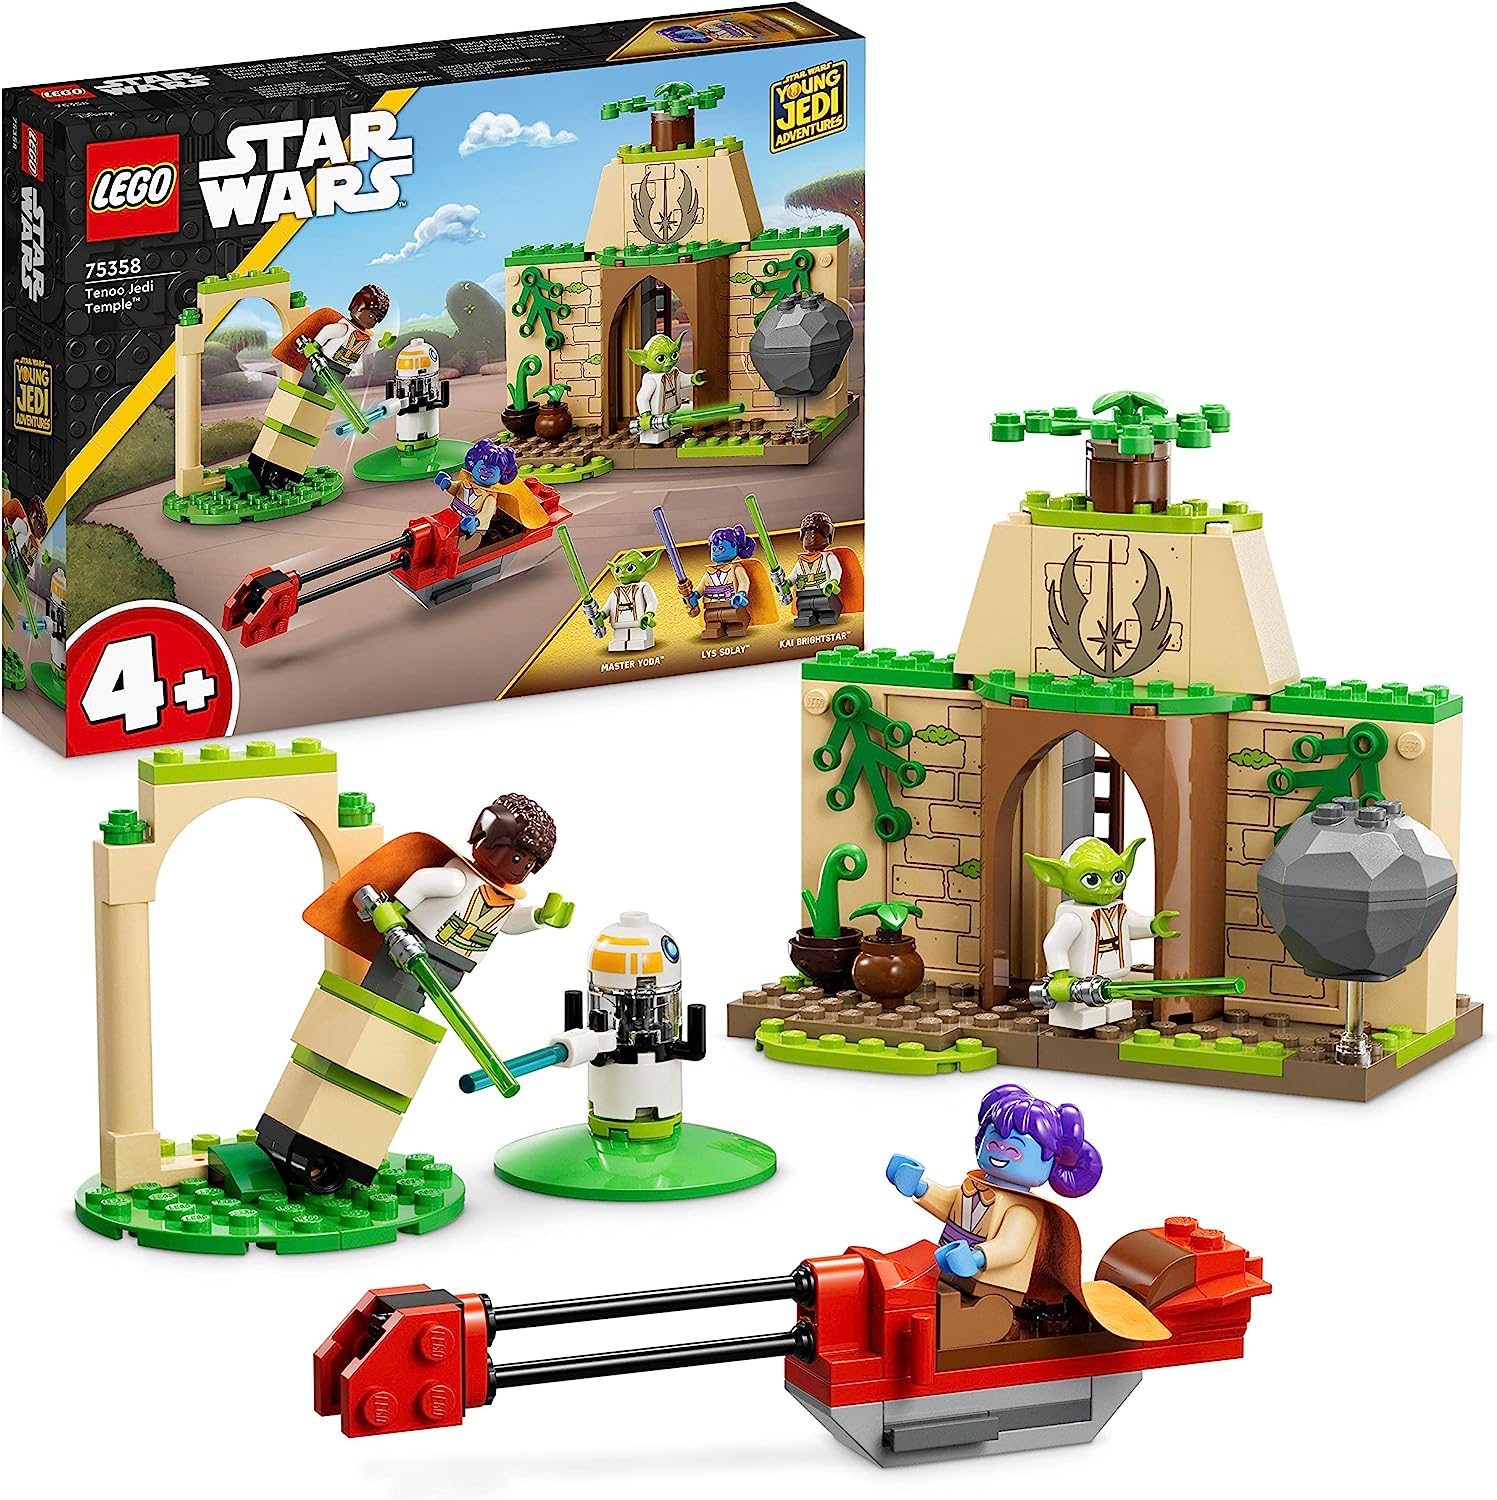 LEGO 75358 Star Wars Tenoo Jedi Temple Game Set for Beginners with Lys Solay, Kai Brightstar, Master Yoda, including Speedes Bike and Lightsabers for Children from 4 Years